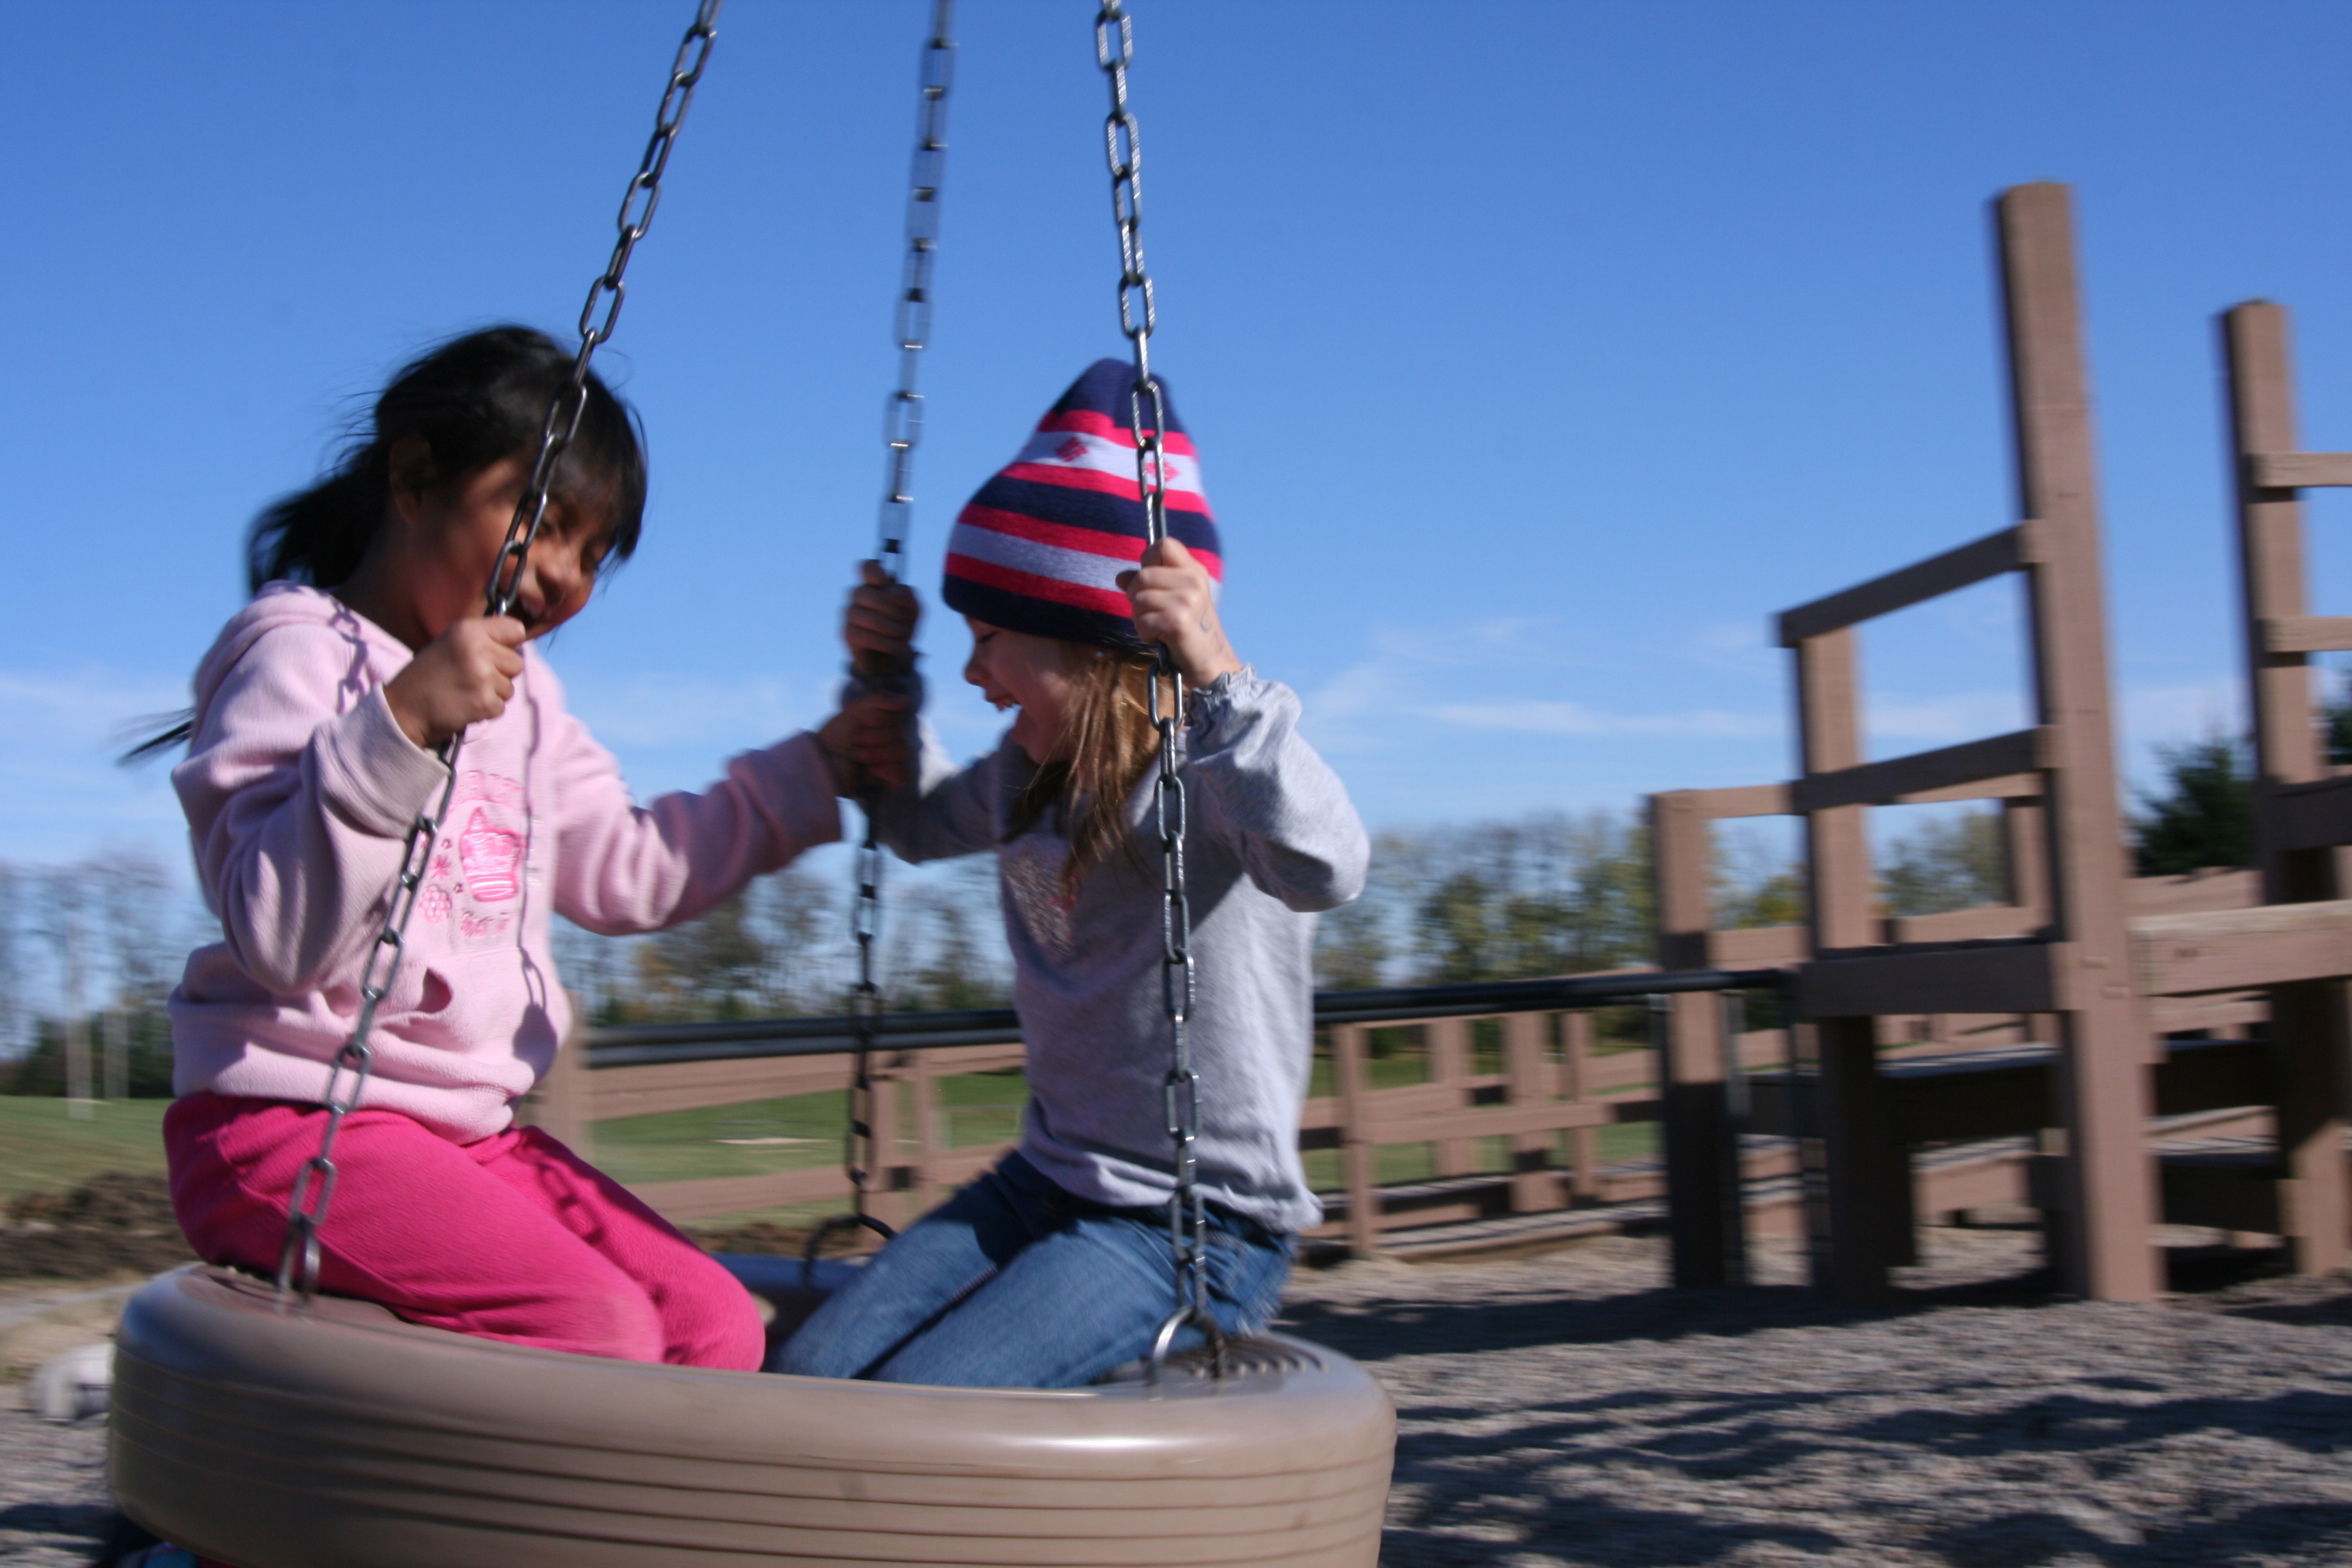 Having fun on the playground at Darlington Elementary-Middle School. Photo by Samantha Overgaard